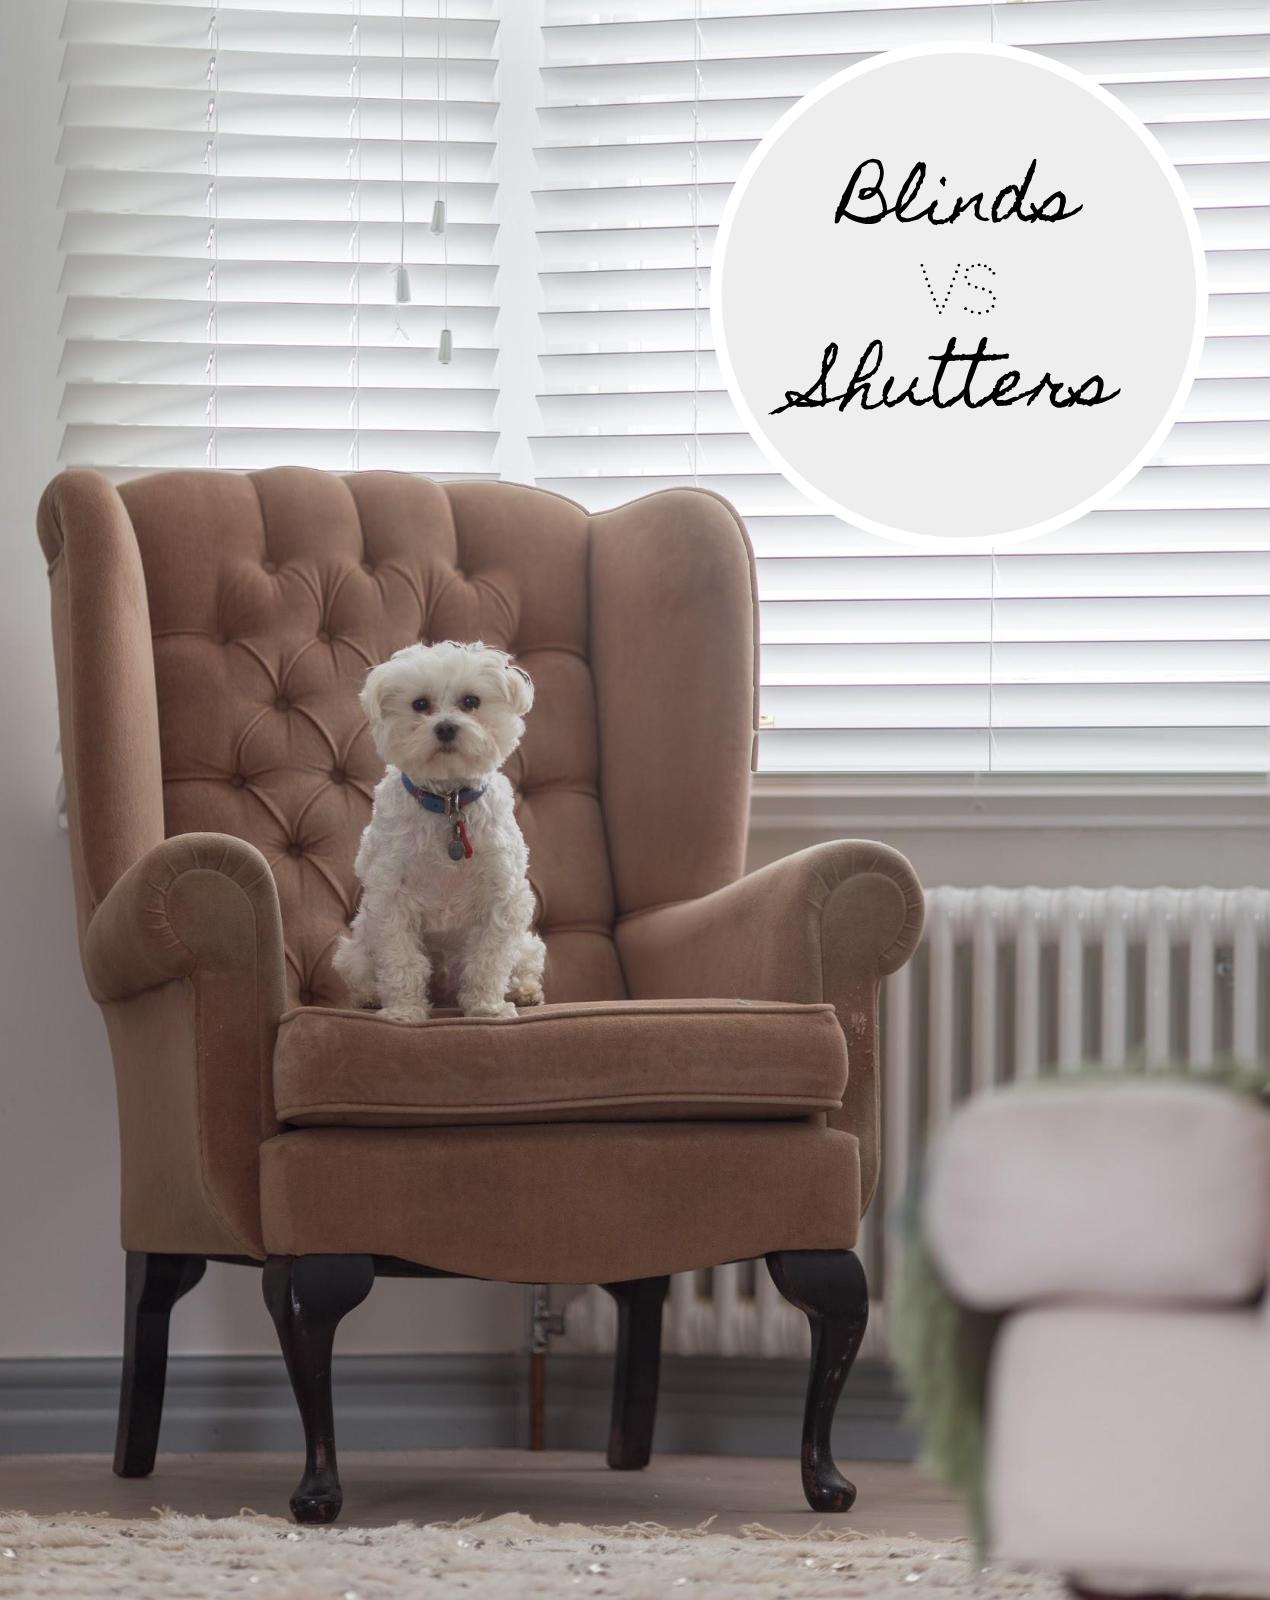 Blinds Vs Shutters. Why Blinds Are The New Shutters by WeLoveHomeBlog.